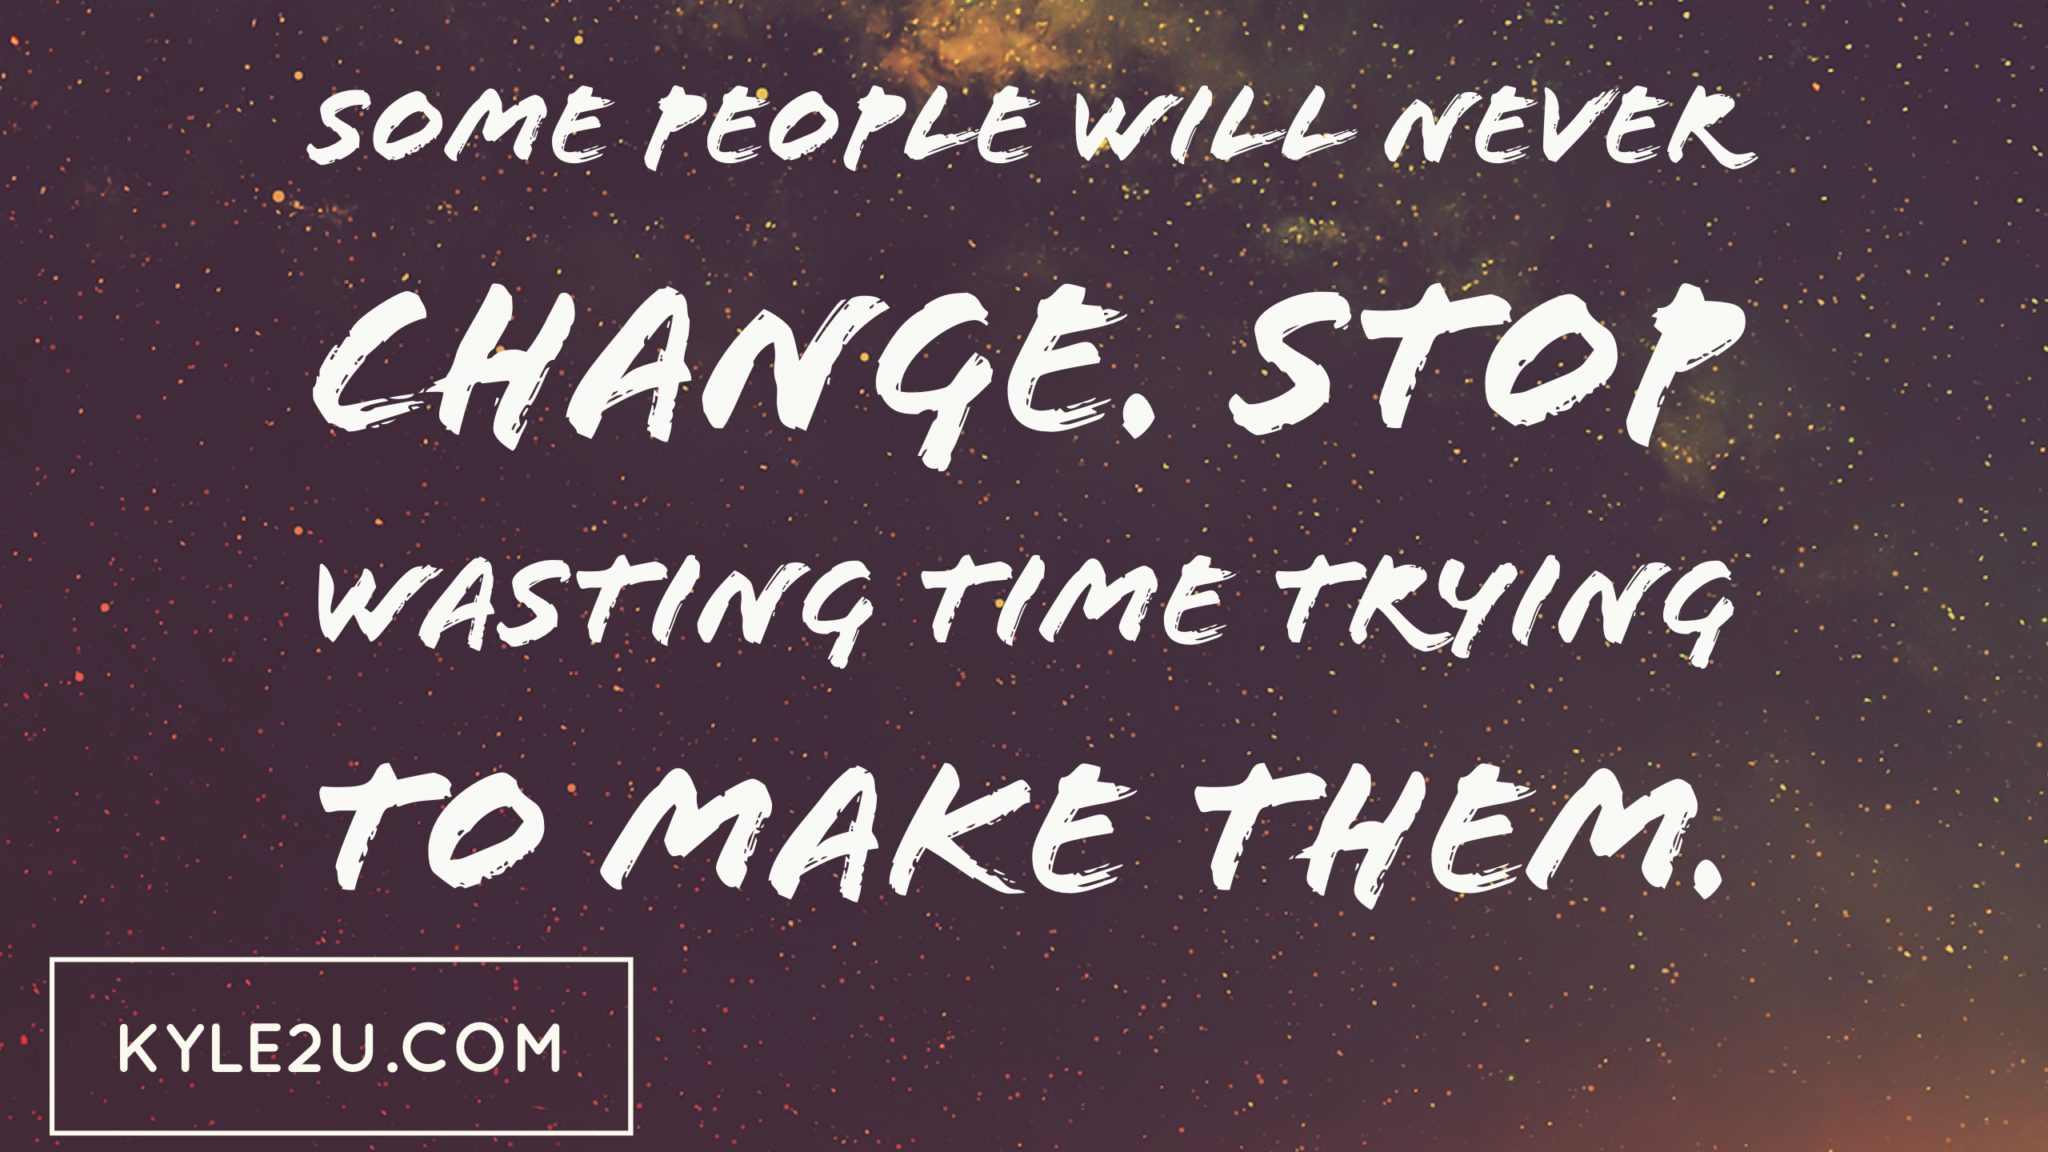 Some people will never change. Stop wasting time trying to make them.